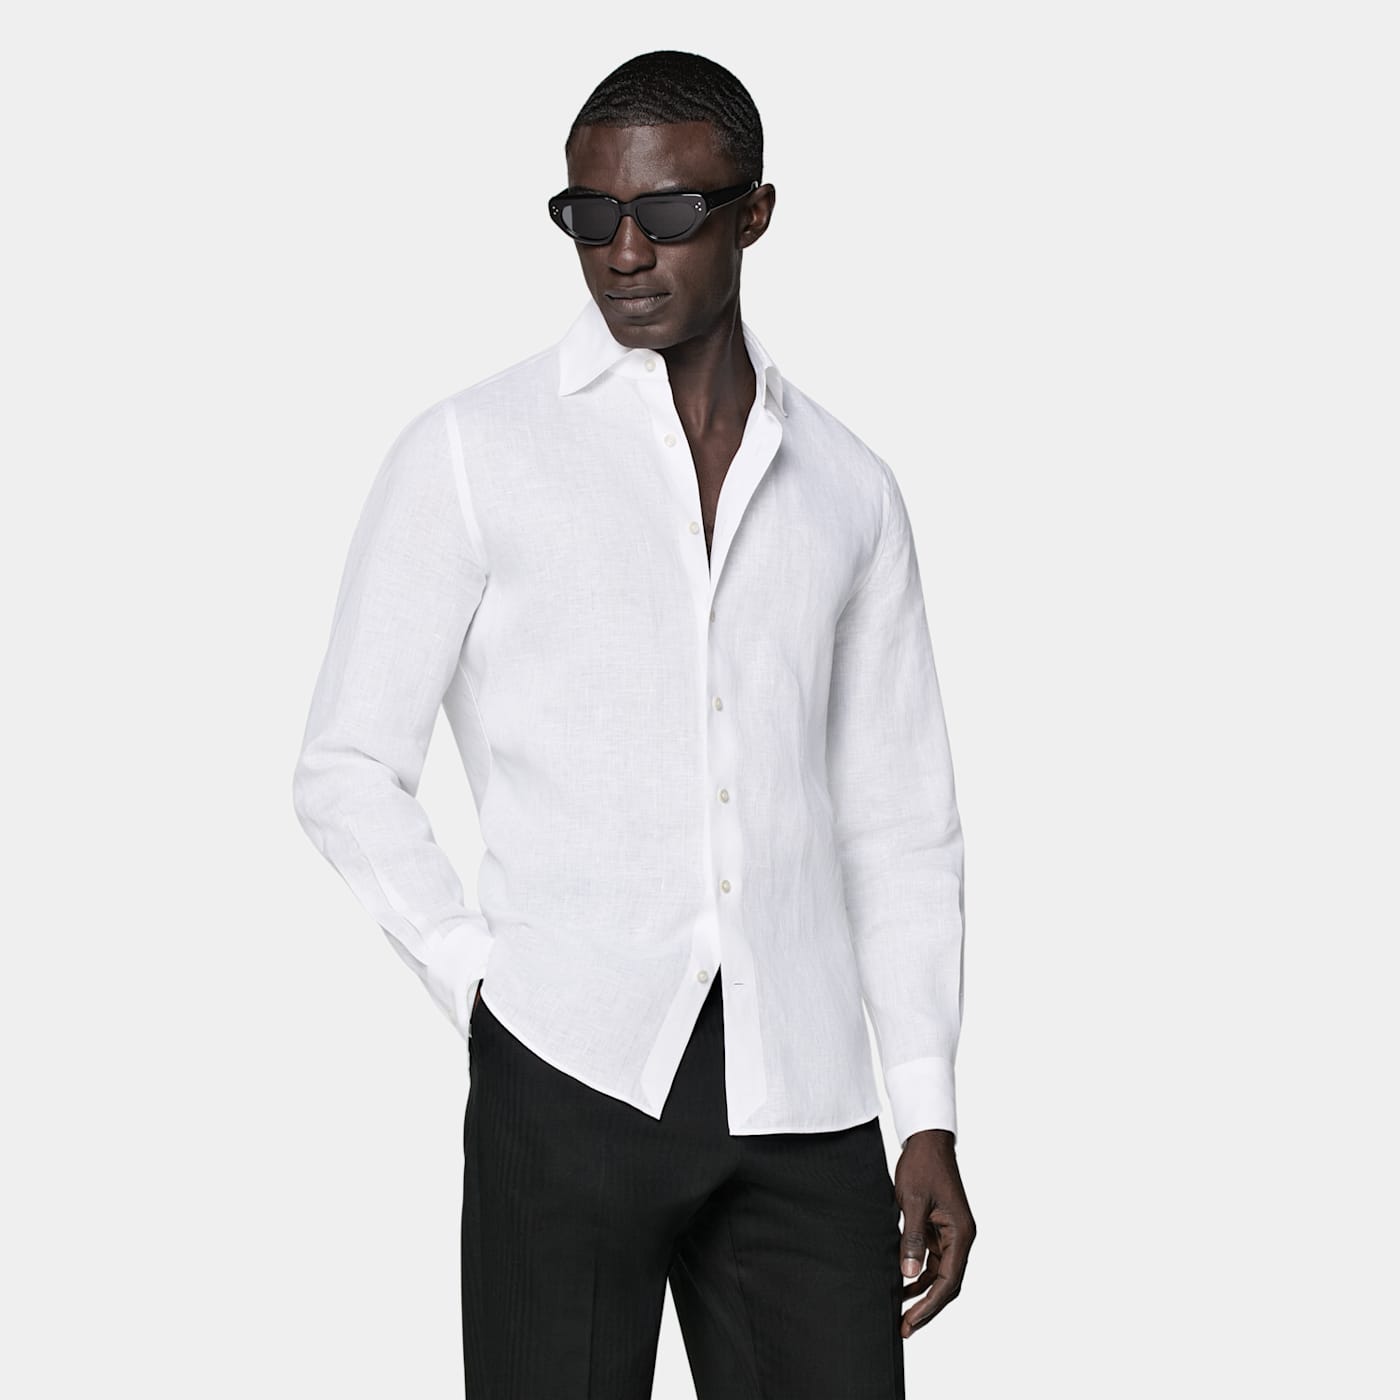 Suitsupply White Slim Fit Shirt